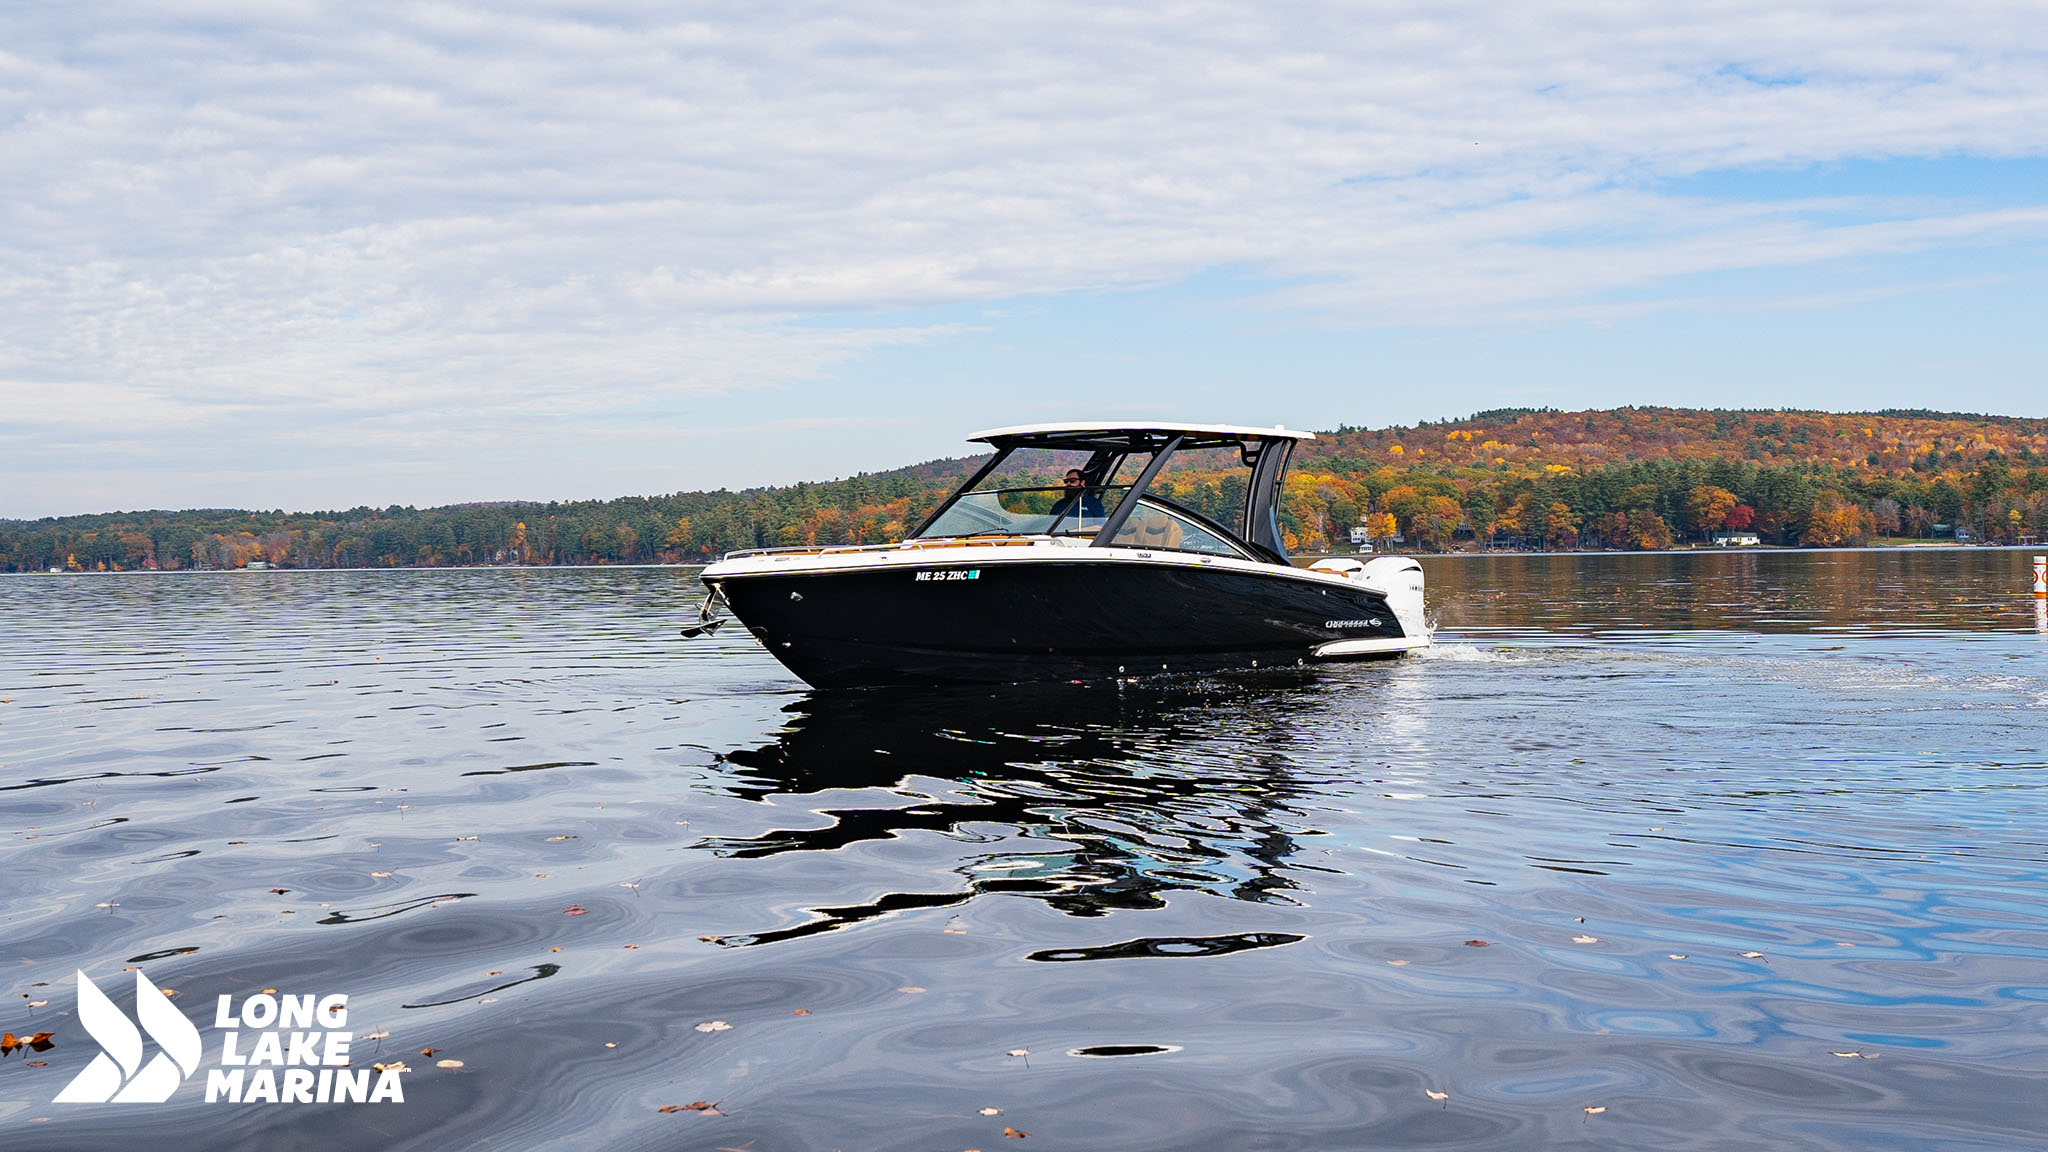 New Chaparral Boats For Sale In New York, Boat Service & Rentals